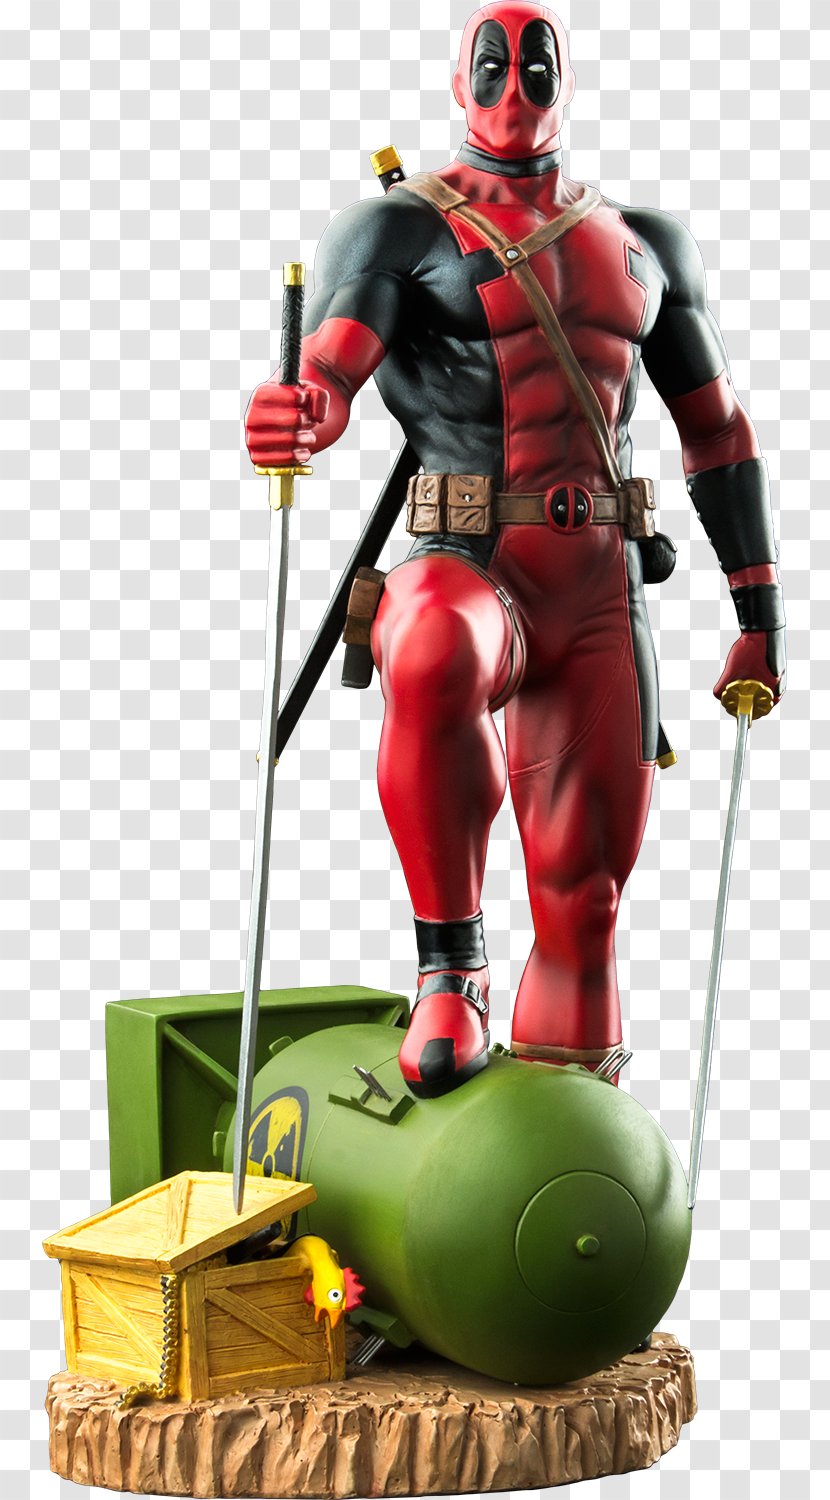 Deadpool Action & Toy Figures Spider-Man Marvel Comics Statue - Fourth Wall - Chimichanga Transparent PNG